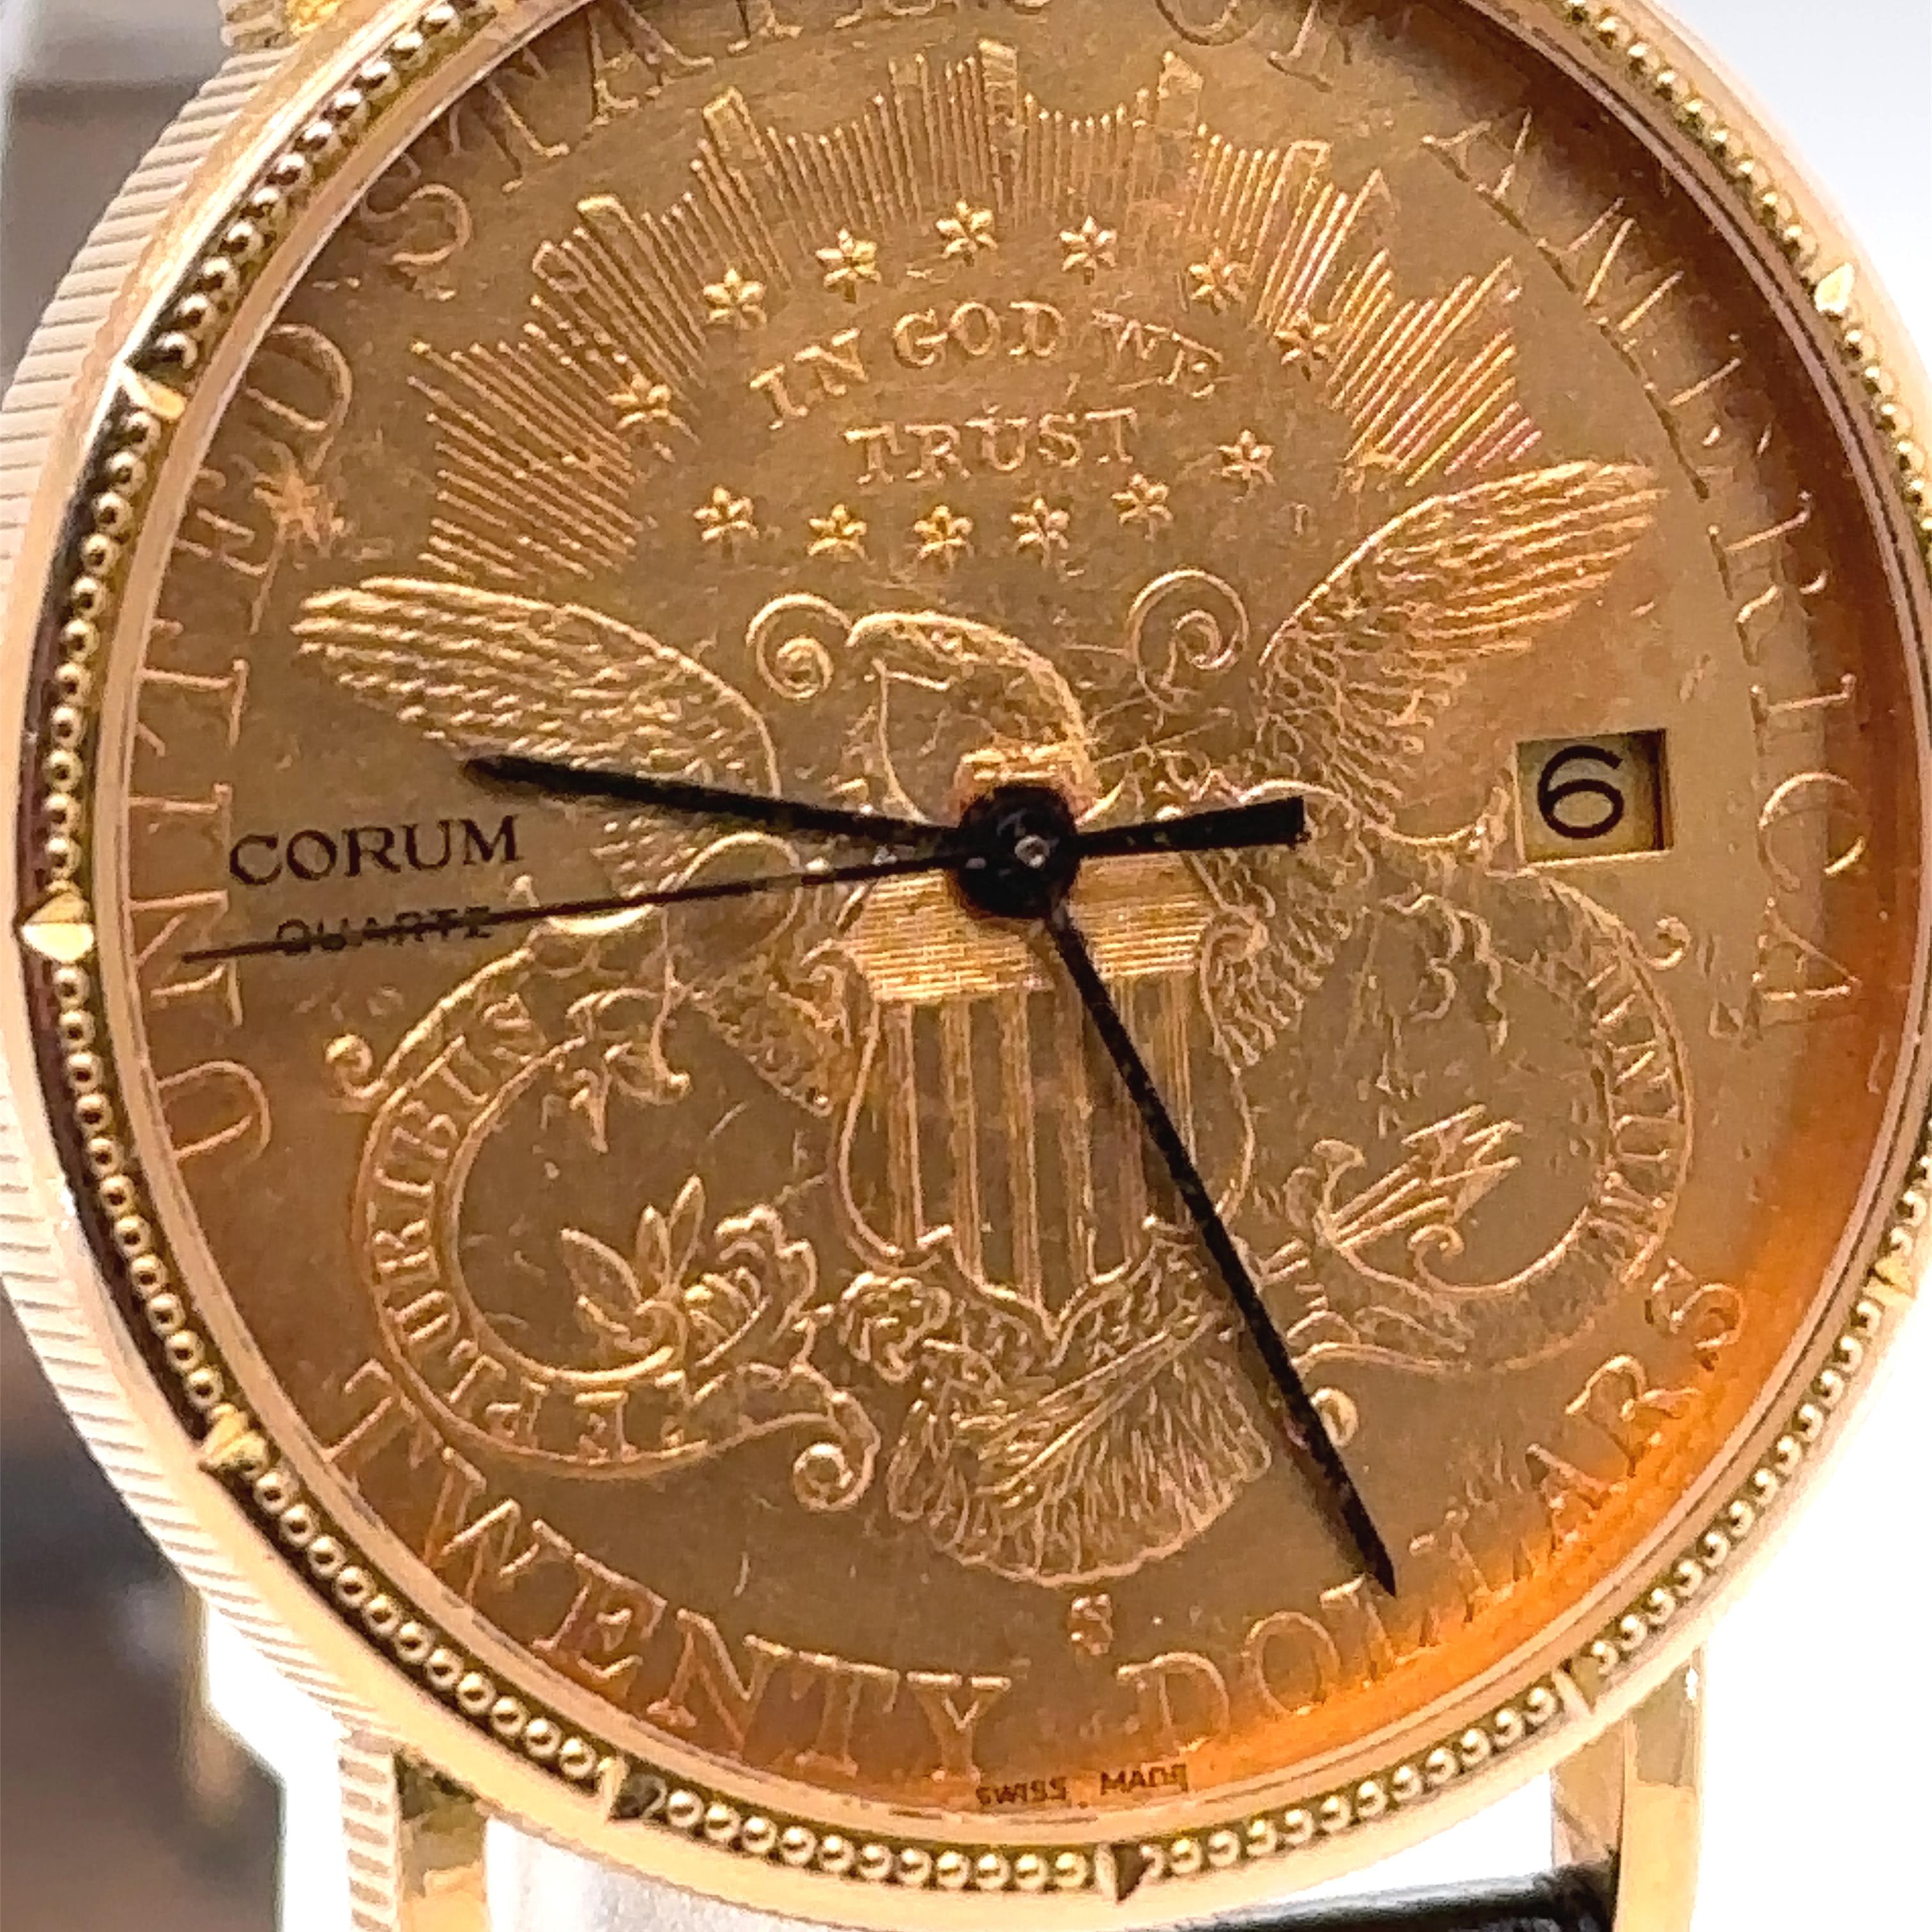 Unique features: 

Corum Double Eagle Coin watch. The case is made of 18ct yellow gold weighing 50g with a leather bracelet.

Metal: 18ct Yellow Gold
Carat: N/A
Colour: N/A
Clarity:  N/A
Cut: N/A
Weight: 50 grams
Engravings/Markings: